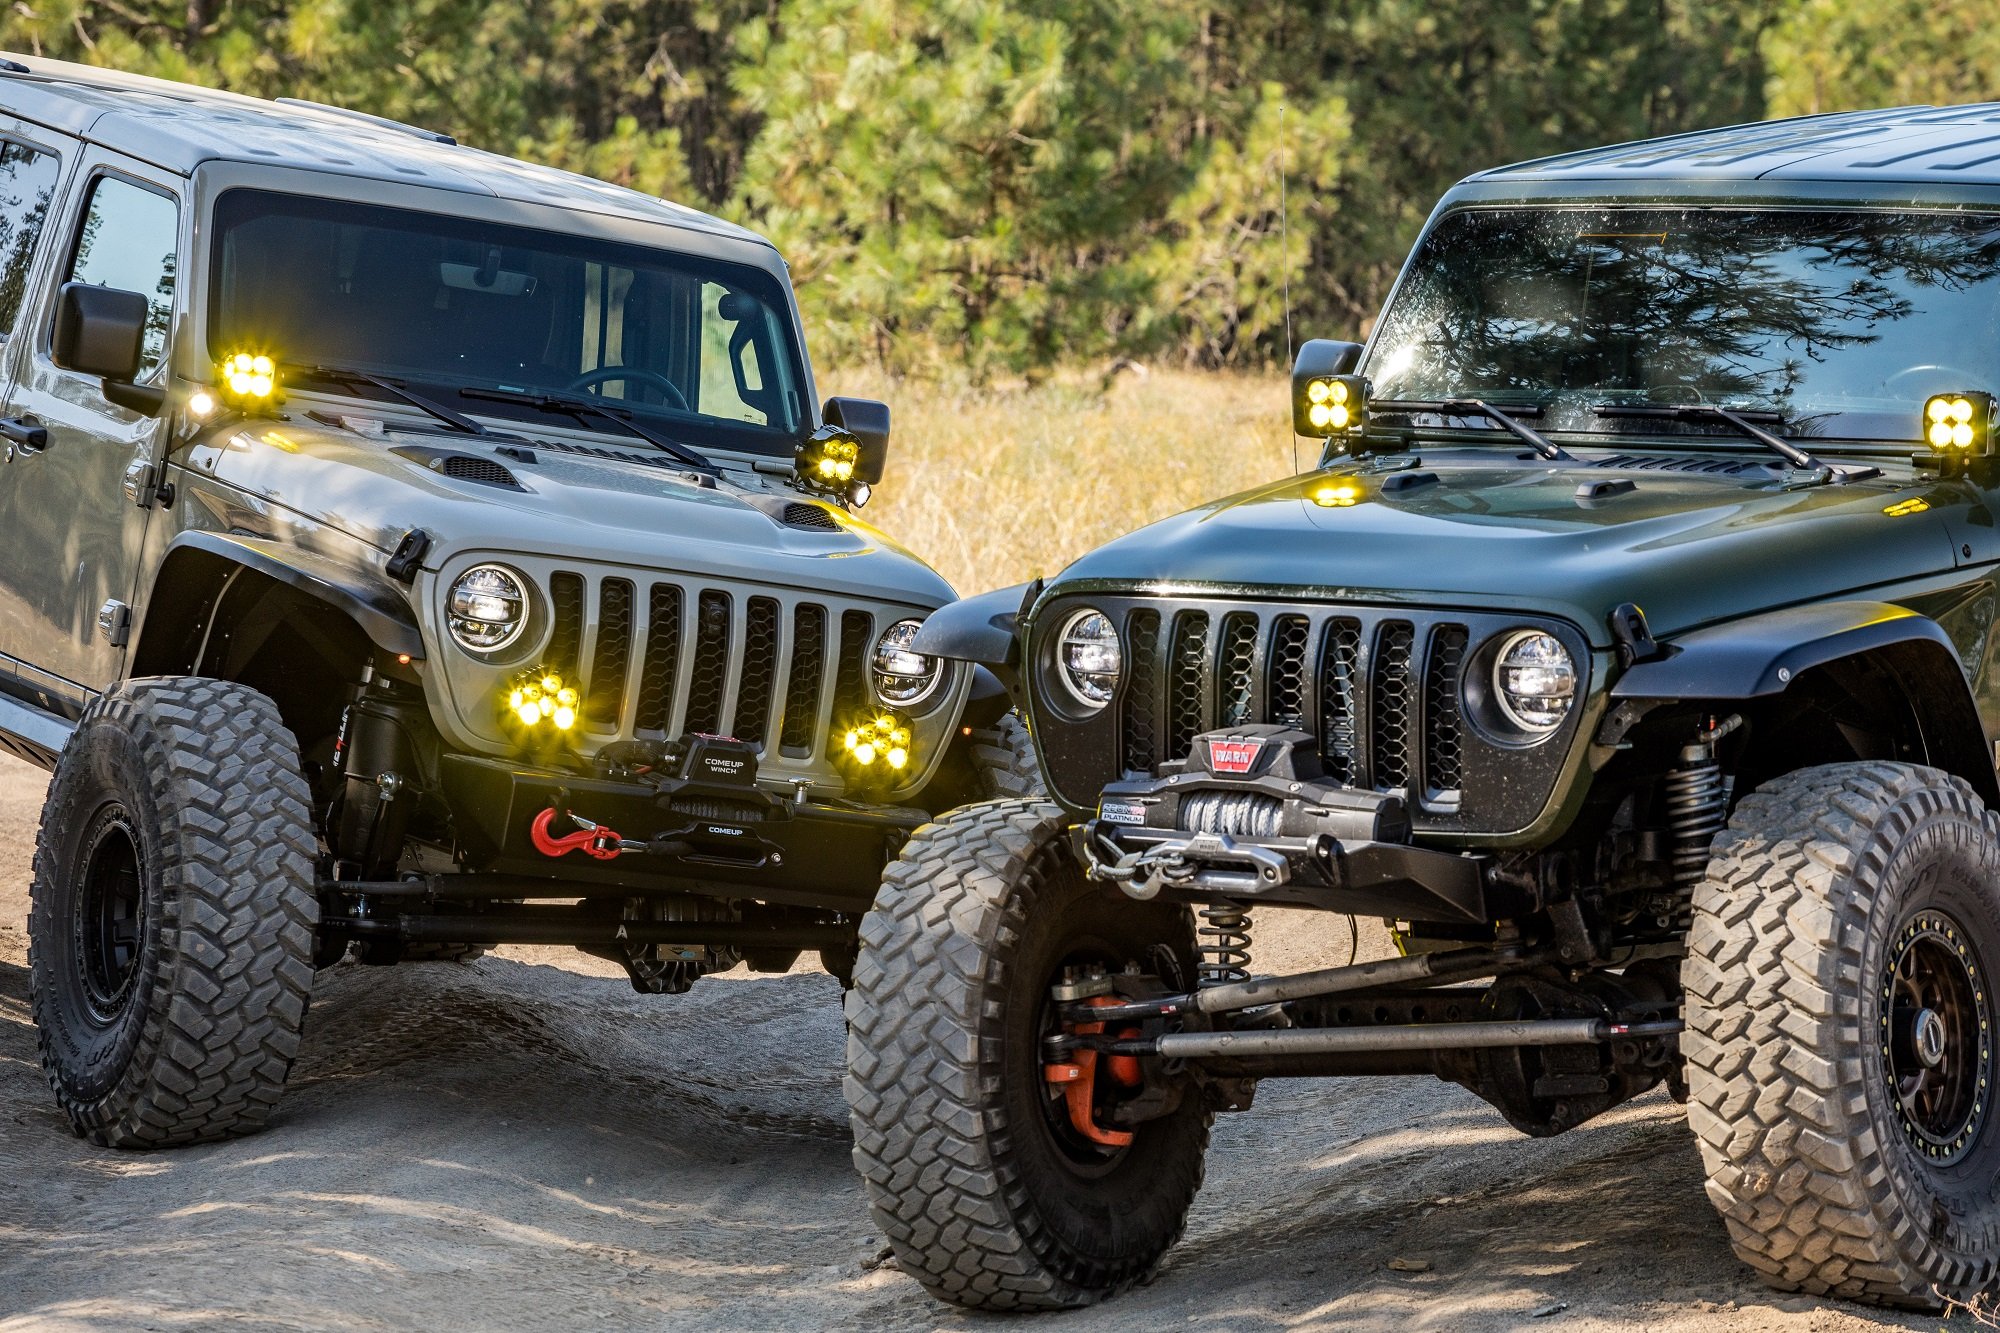 No more diesel power for Jeep Wrangler. Know the reason